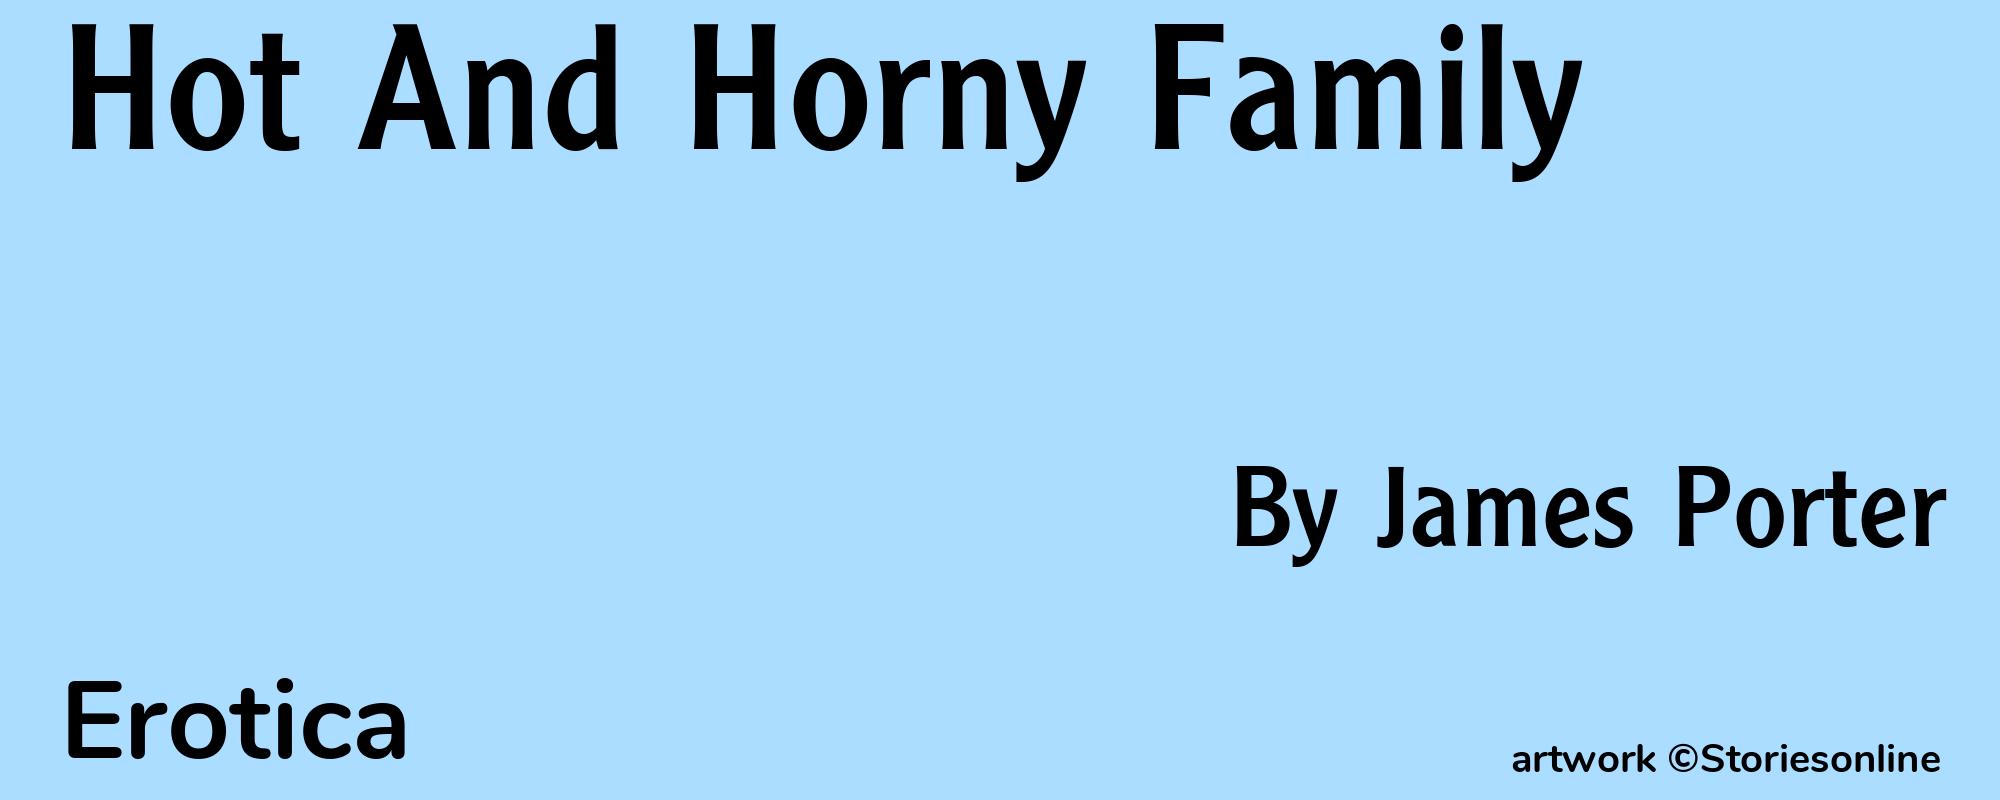 Hot And Horny Family - Cover